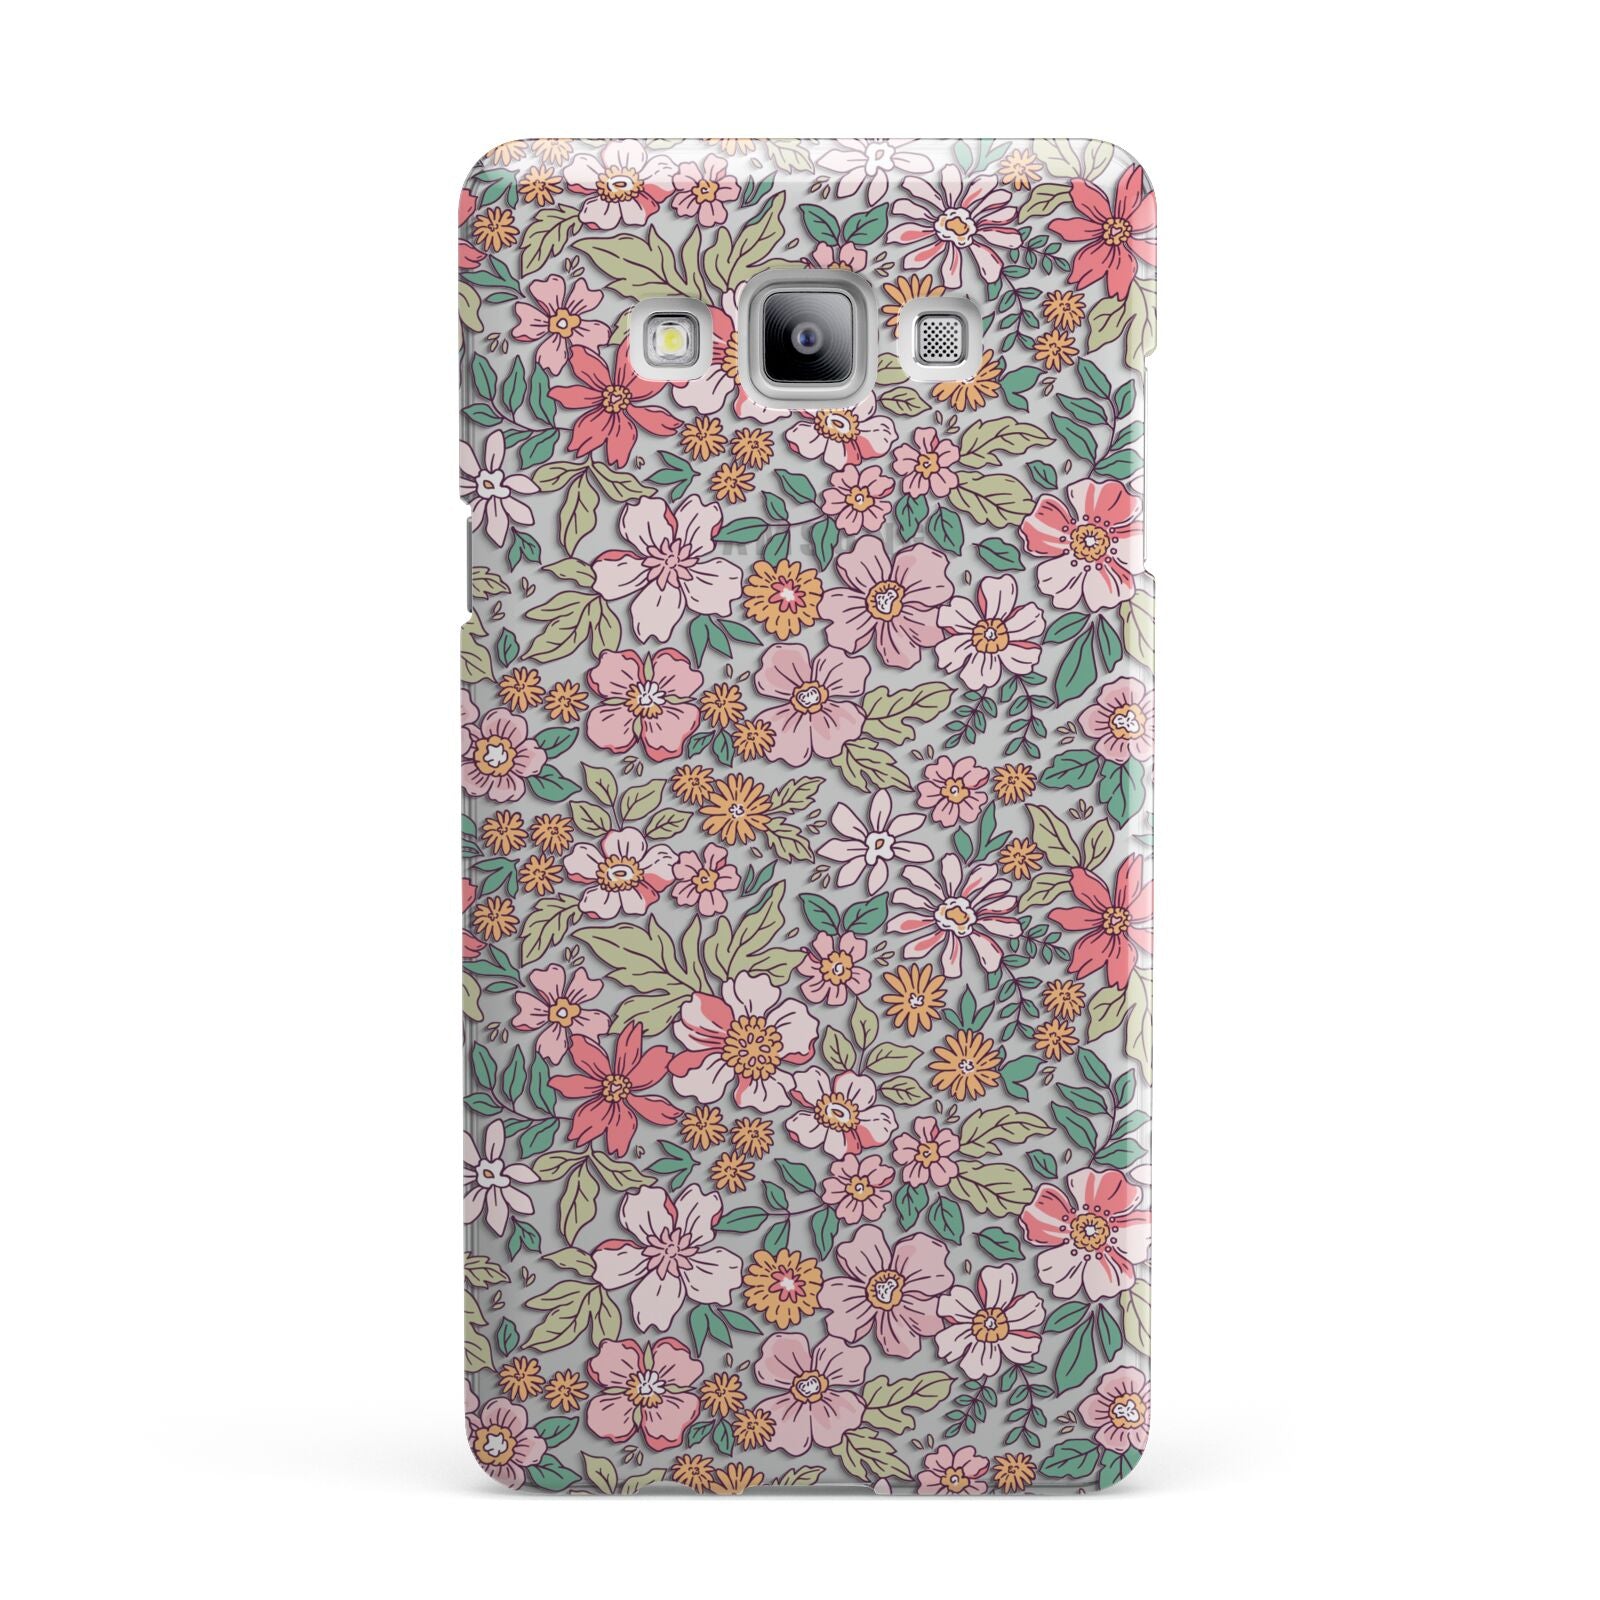 Small Floral Pattern Samsung Galaxy A7 2015 Case